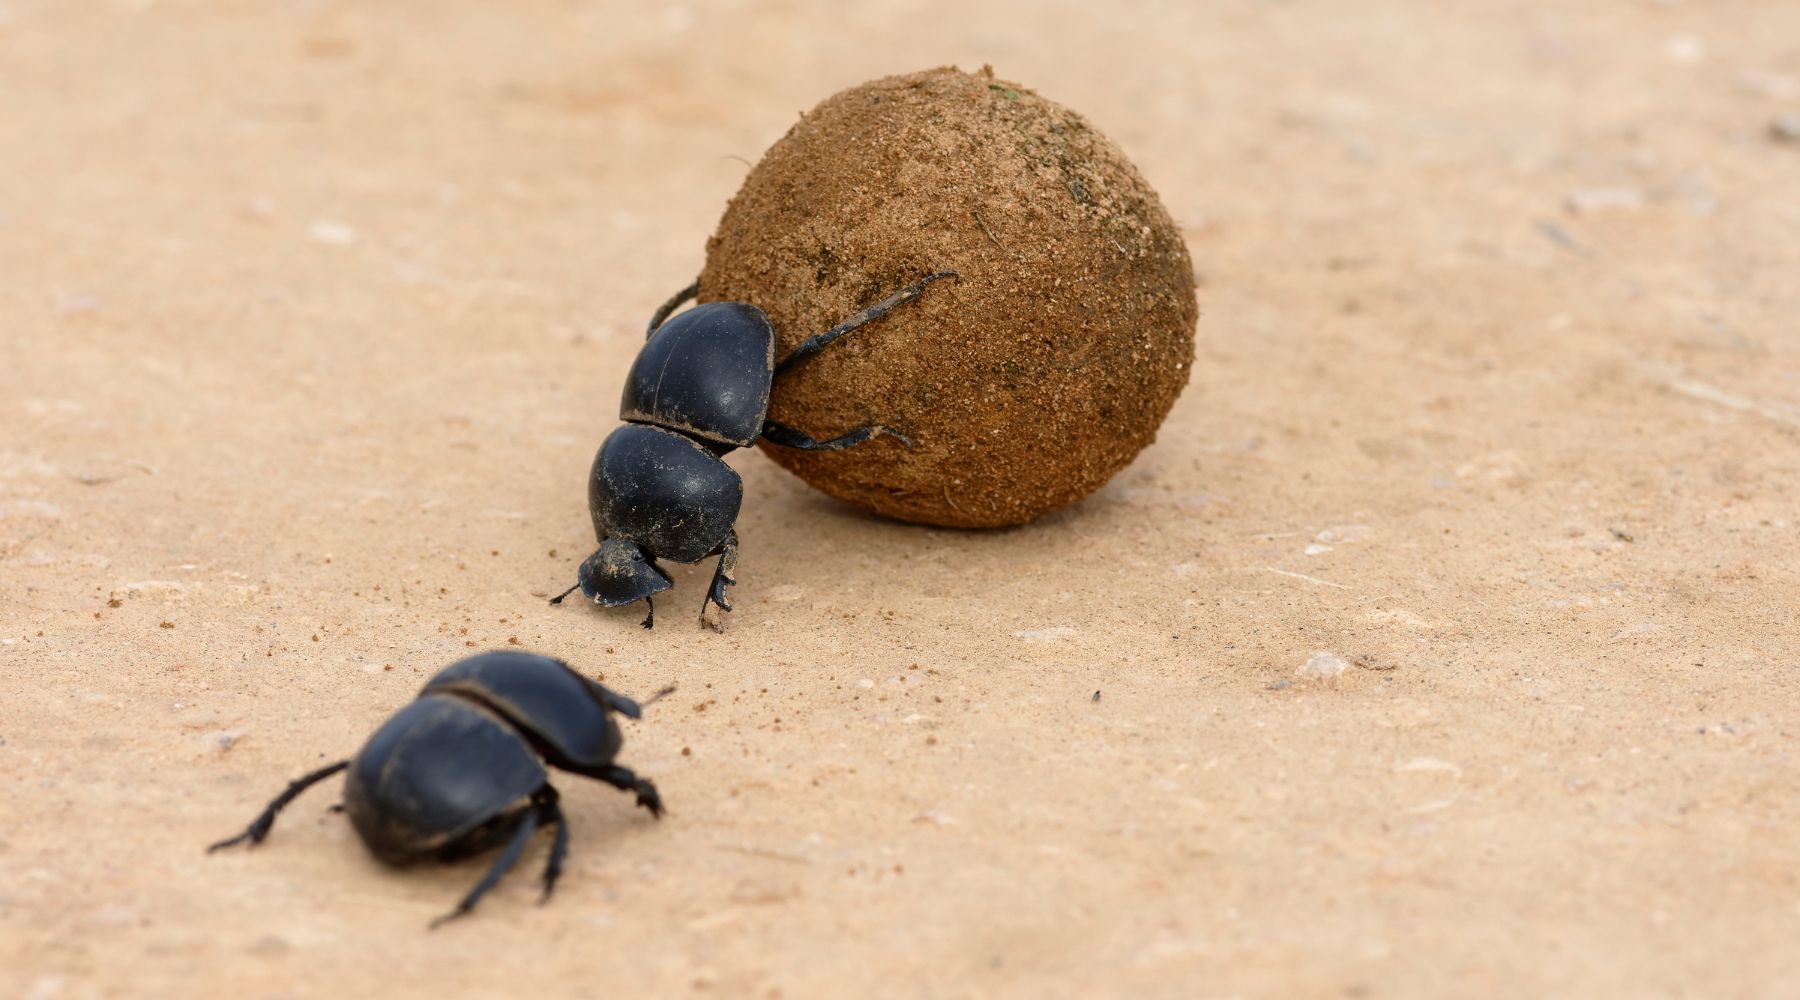 Dung beetle rolling dung